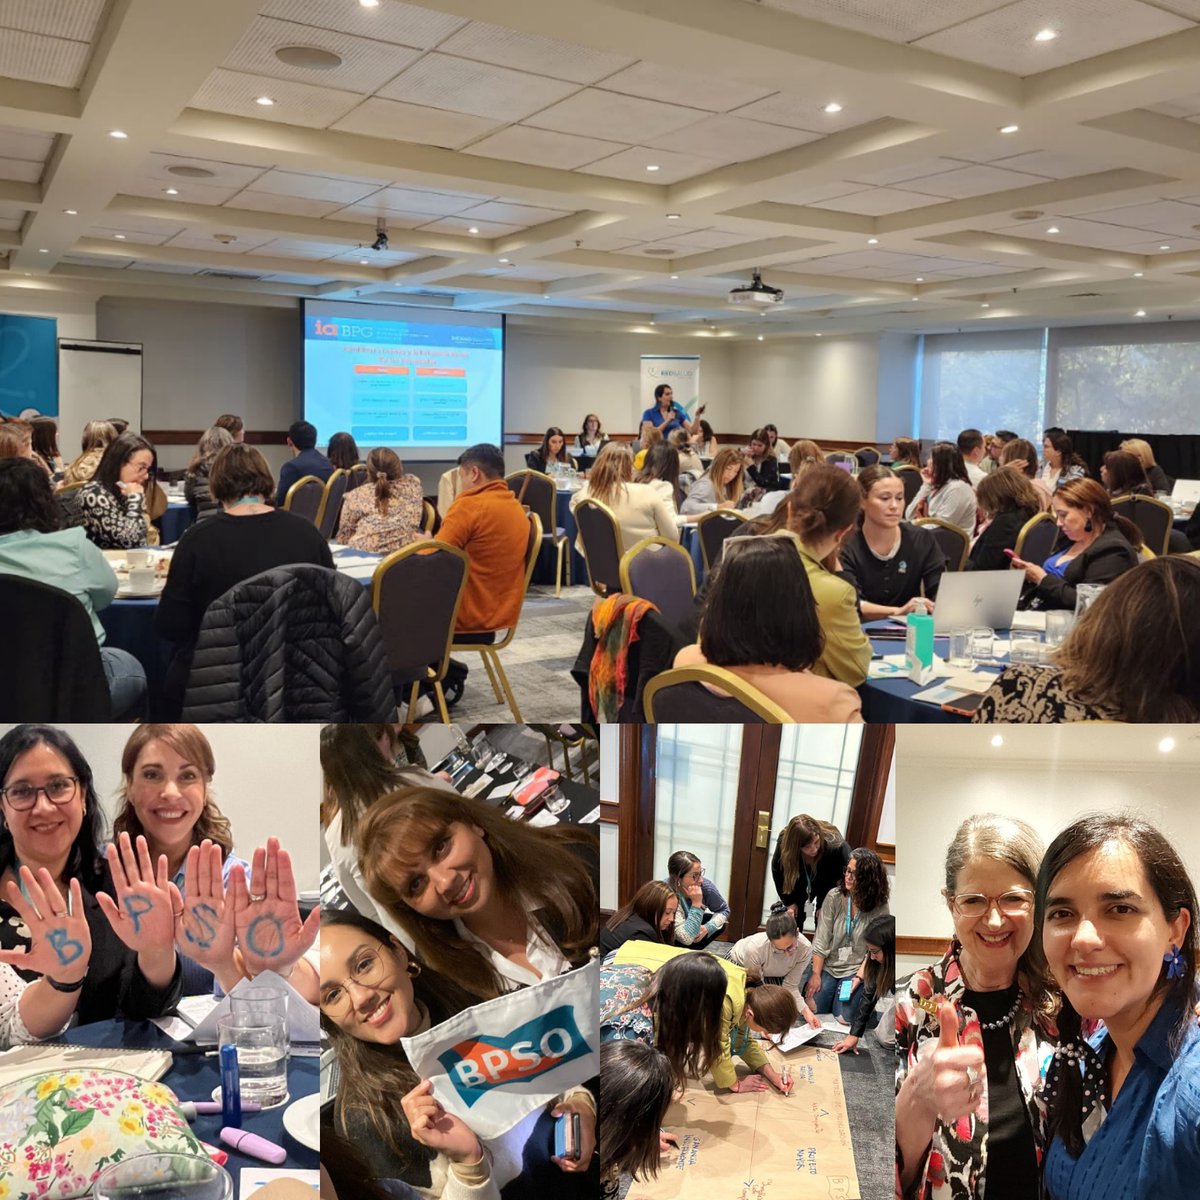 .@RedSaludCChC's #BPSOChampions training is in full motion. 90+ nurses & other professionals from cities across Chile are — on a journey of career-based self-discovery — committed to delivering person/family-centered care based in evidence. #ICYMI: Here's a snapshot from day 2.